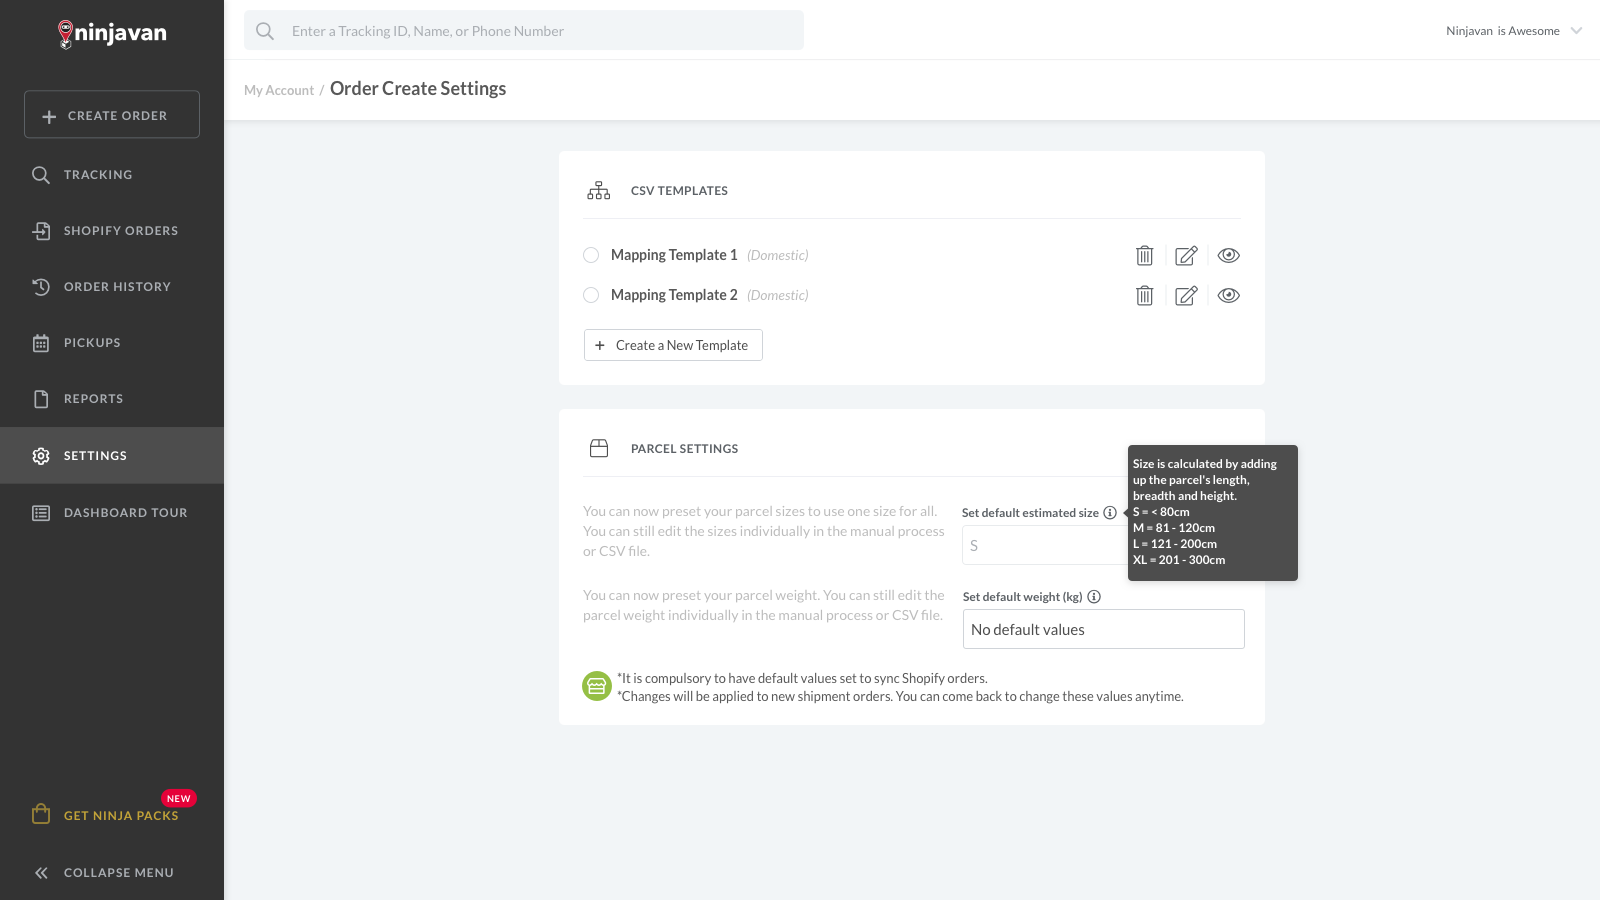 Set up default parcel settings for your Shopify orders